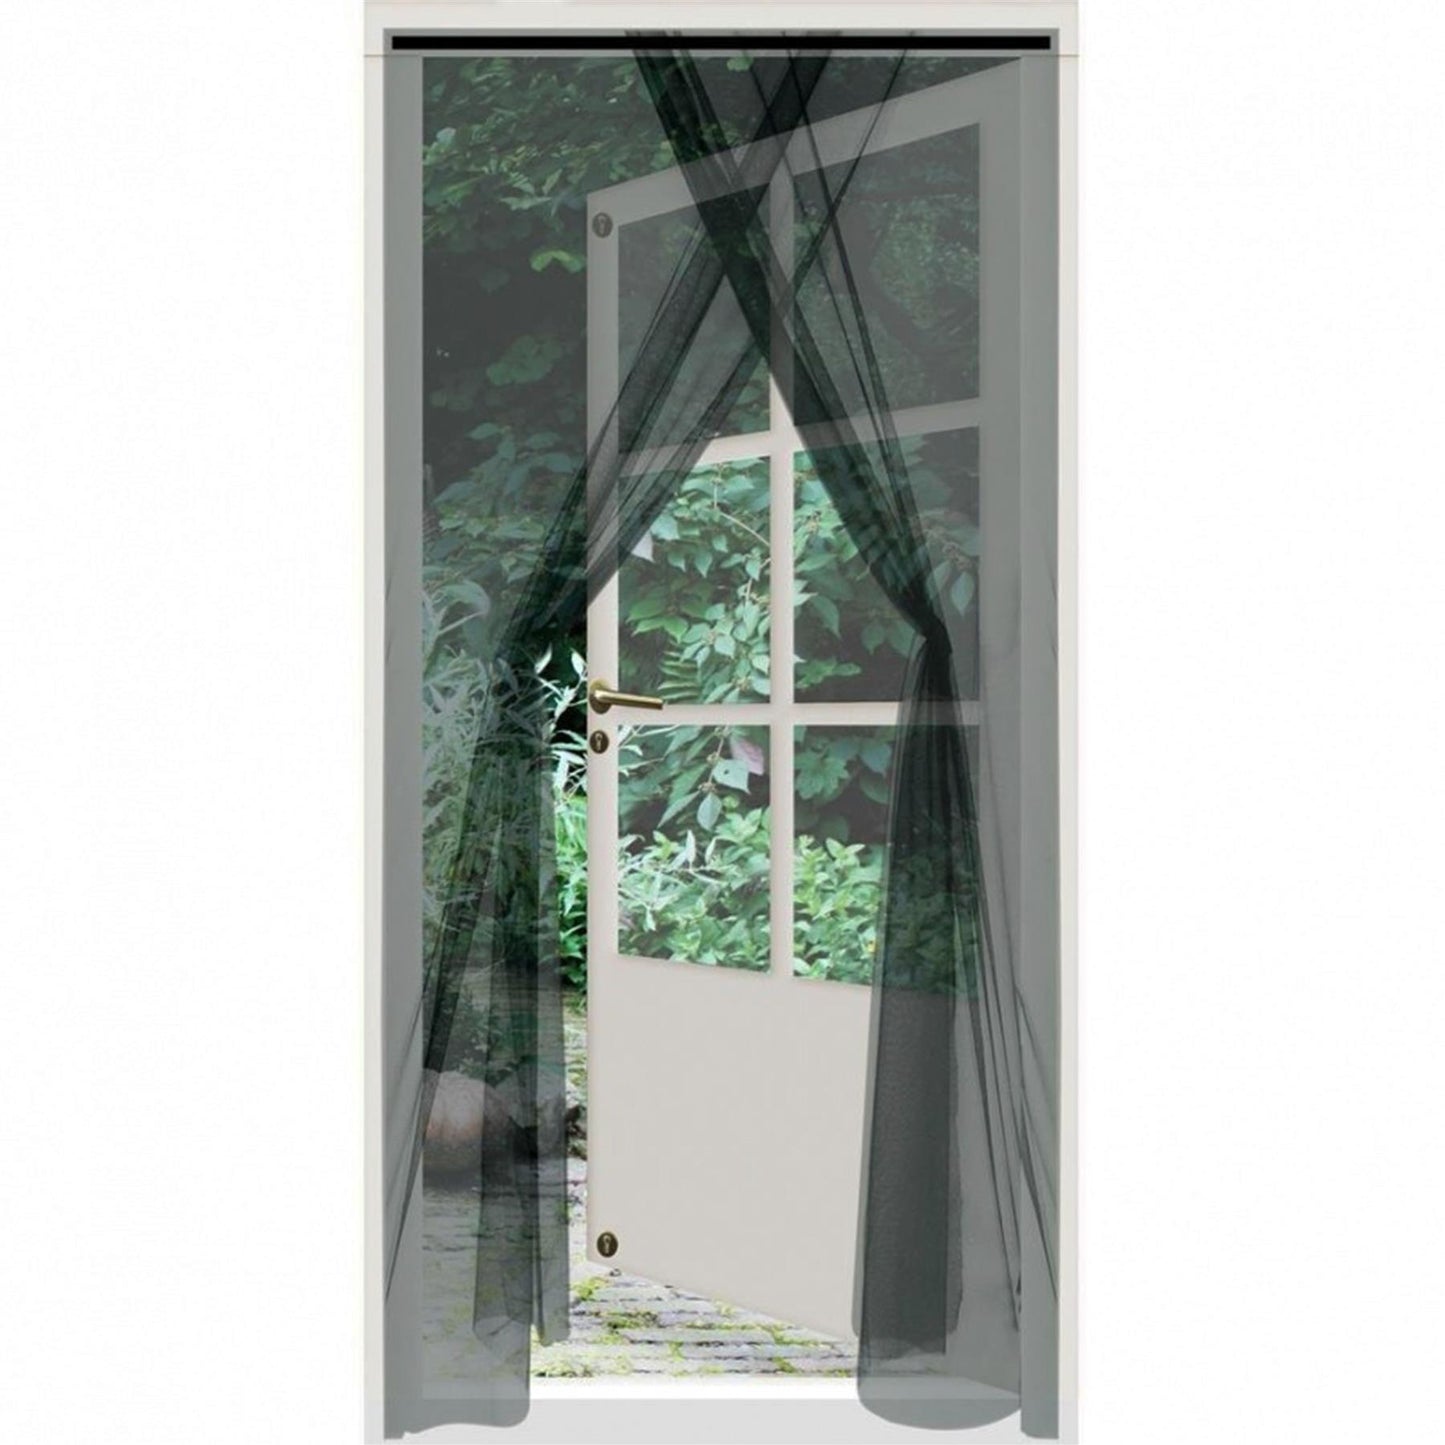 Anti Mosquito Door Curtain & Mesh Guard by GEEZY - UKBuyZone